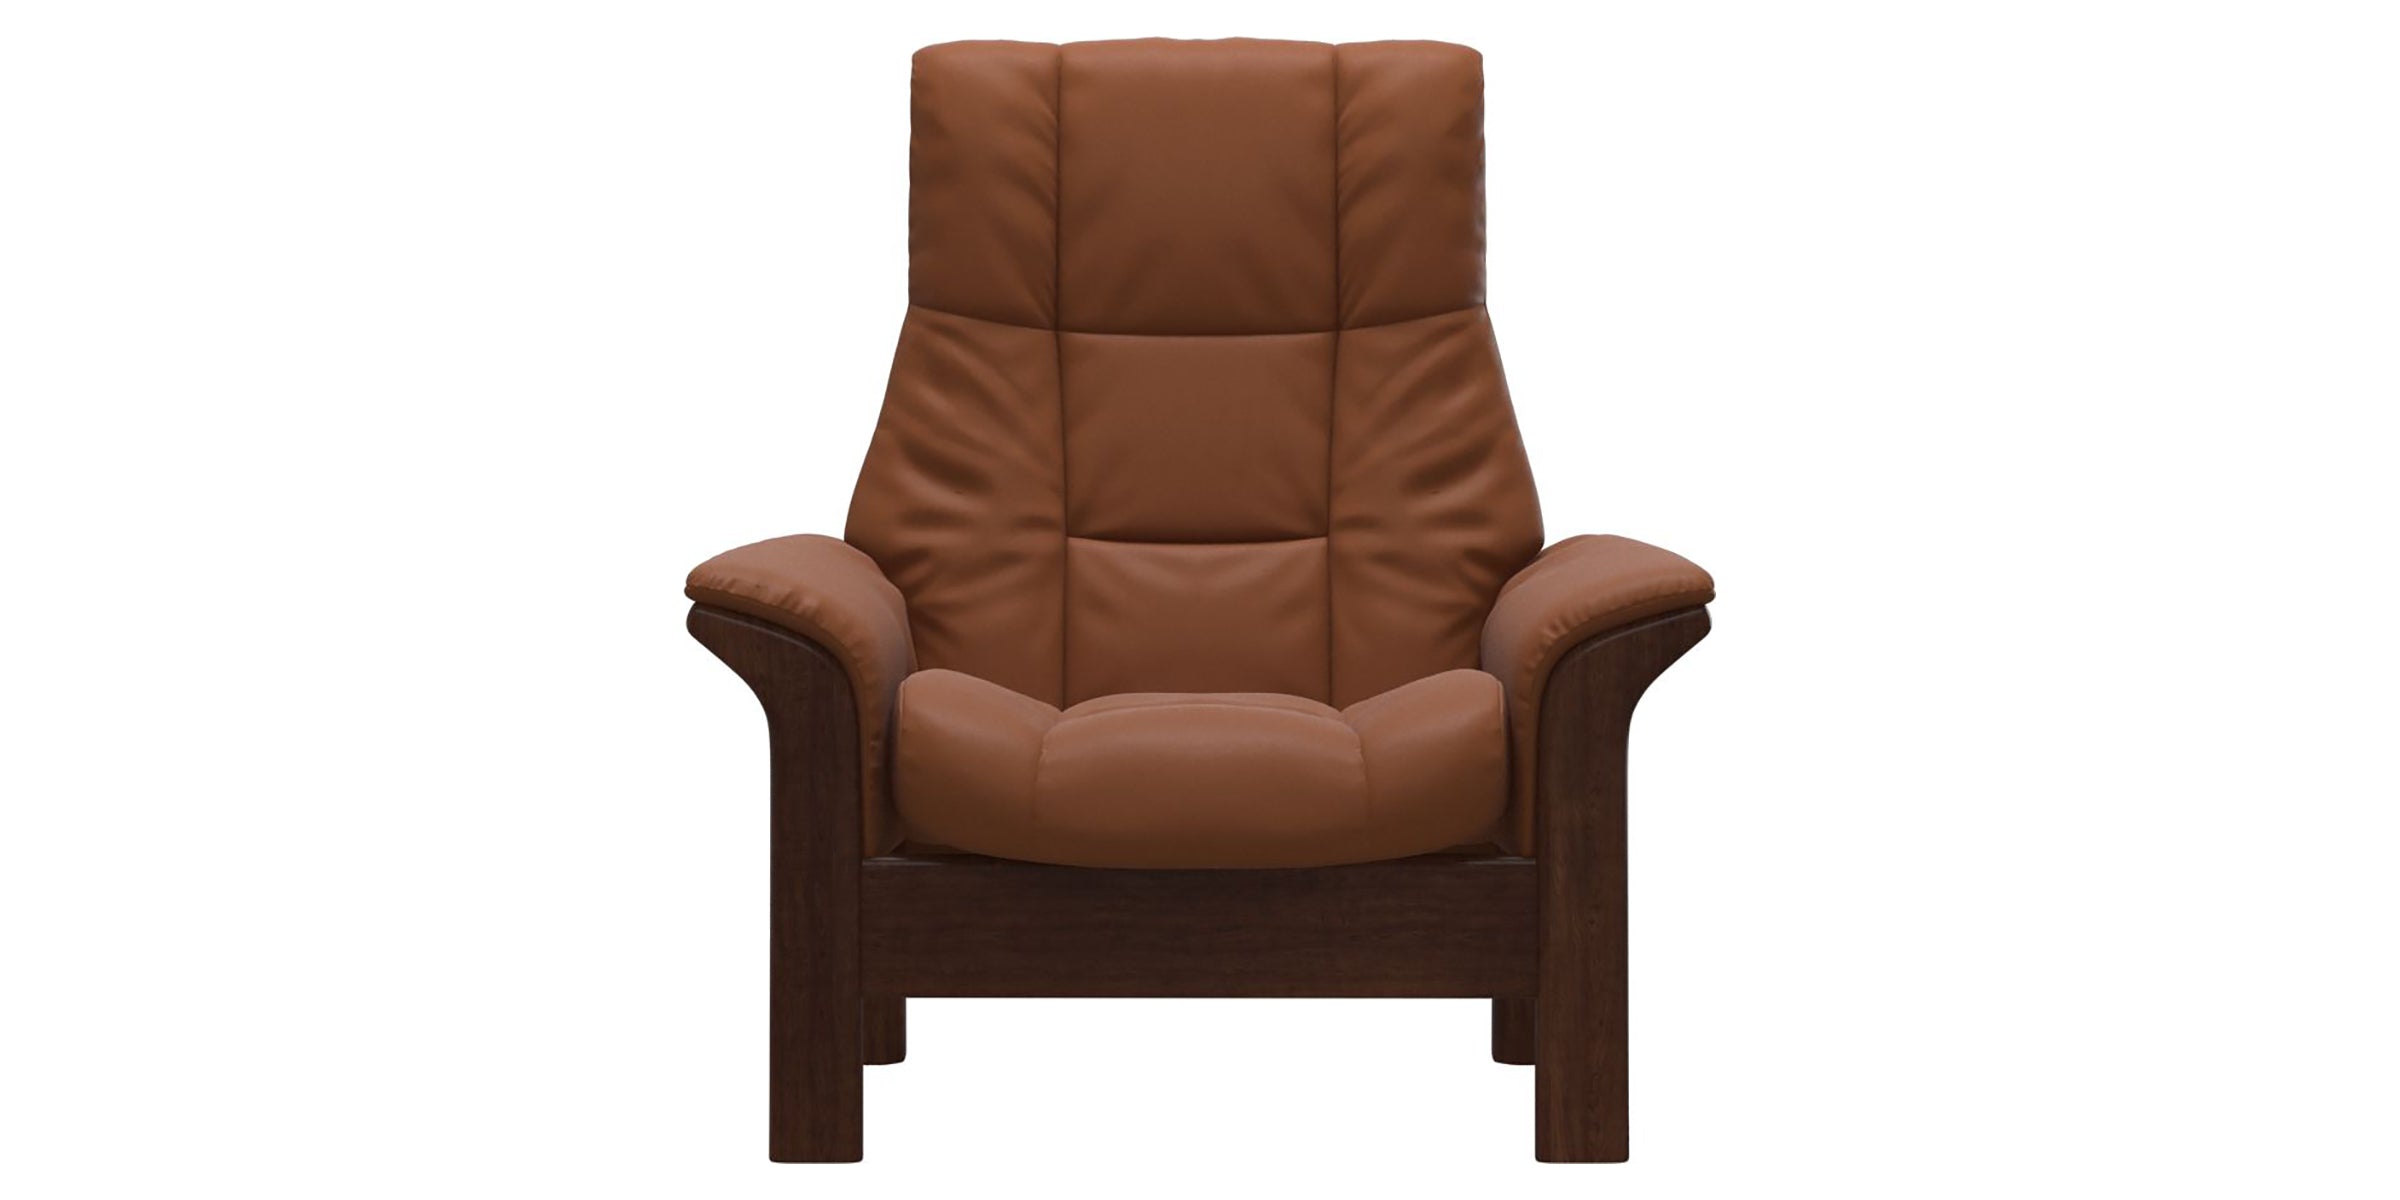 Paloma Leather New Cognac and Brown Base | Stressless Windsor High Back Chair | Valley Ridge Furniture